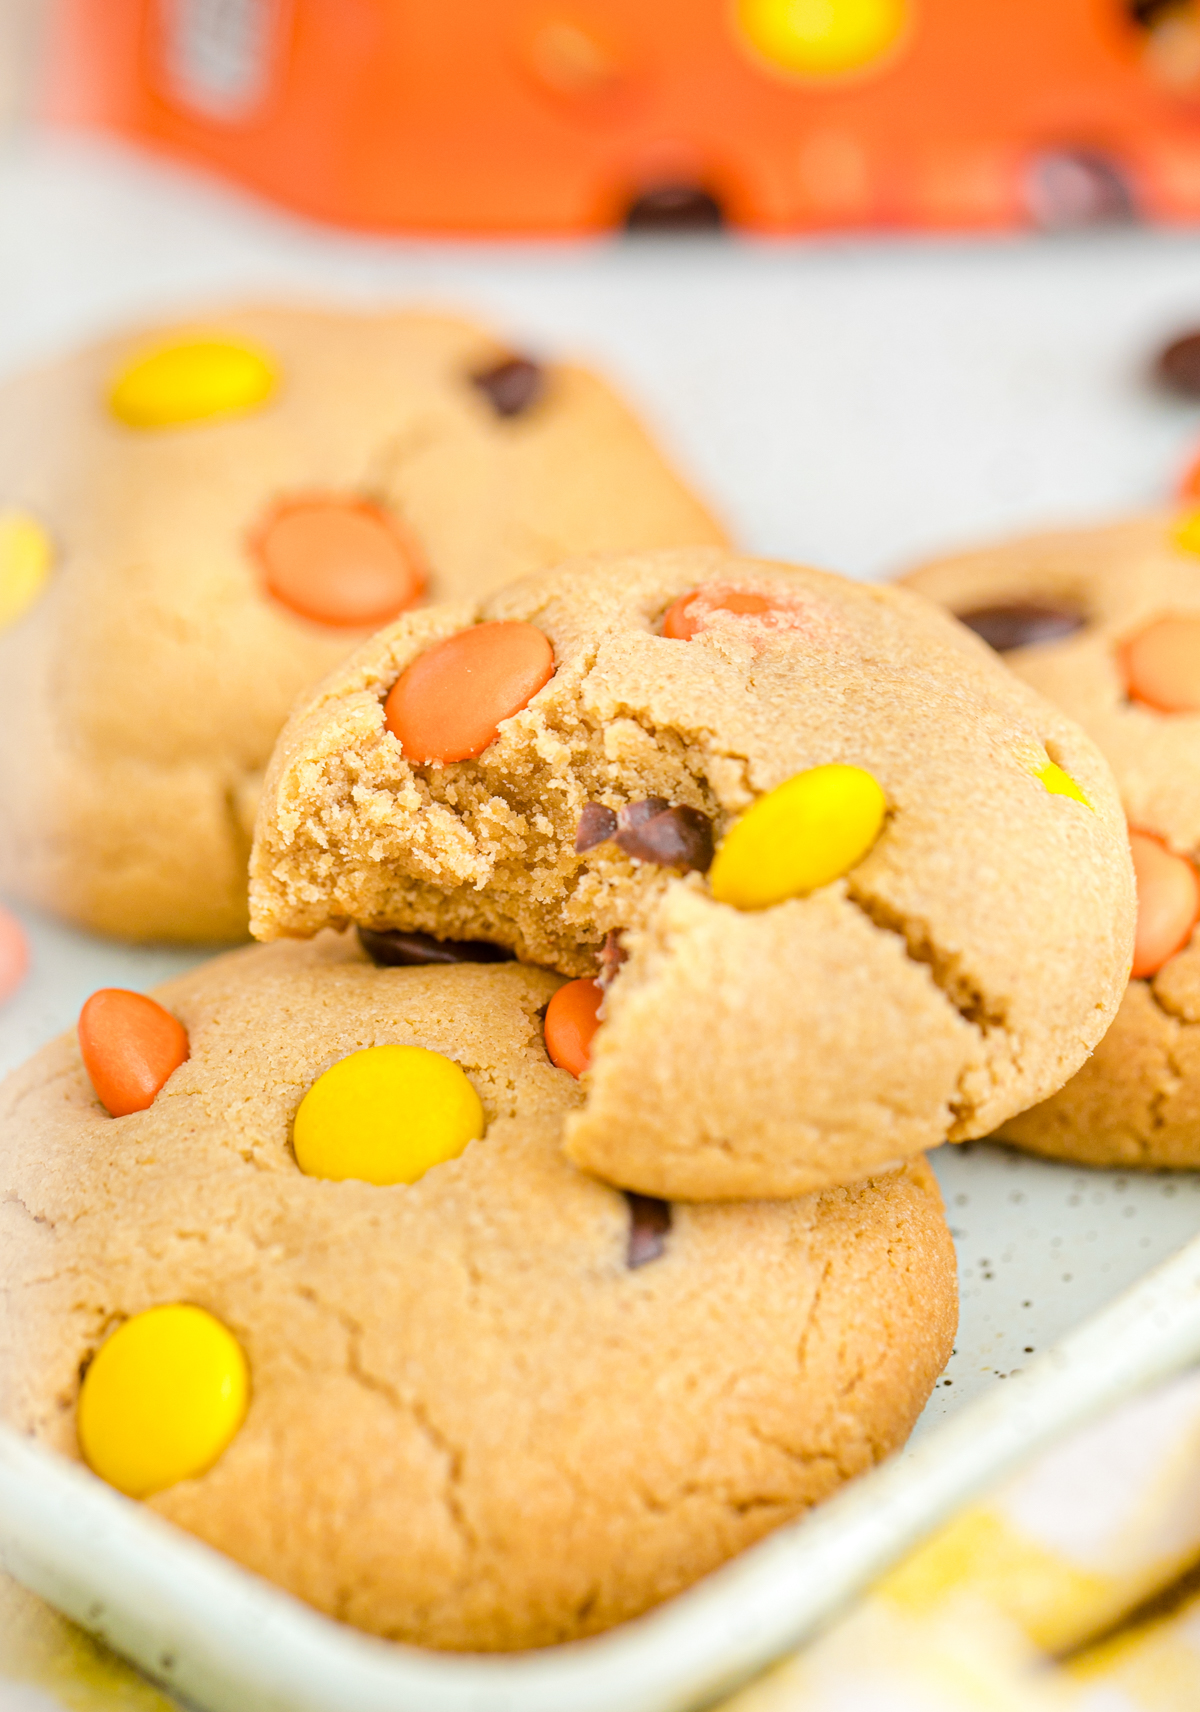 Reese's pieces cookies with a bite taken out of it